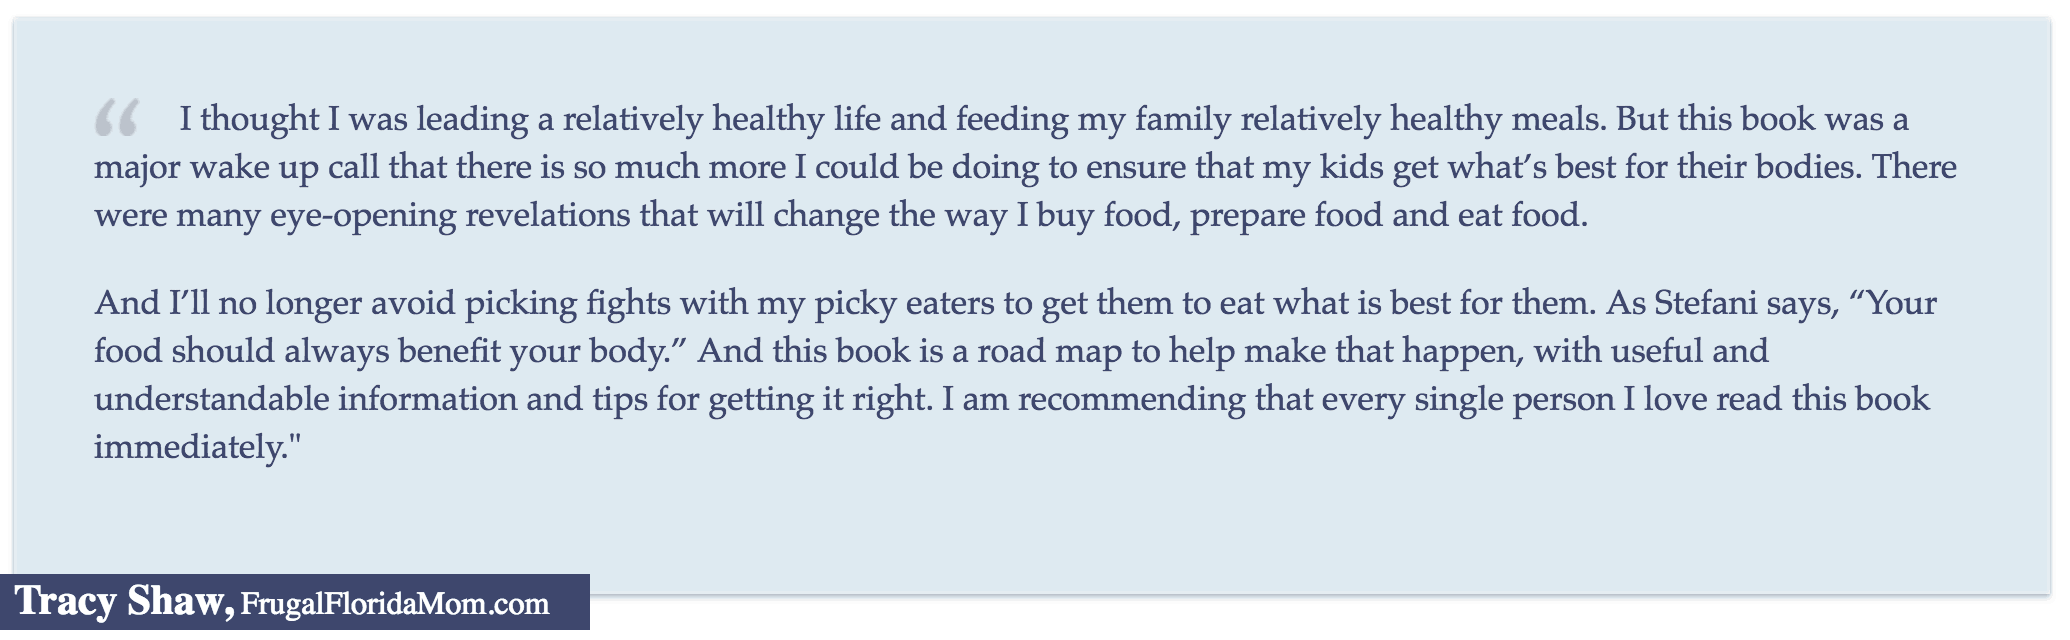 "I thought I was leading a relatively healthy life and feeding my family relatively healthy meals. But this book was a major wake up call that there is so much more I could be doing to ensure that my kids get what's best for their bodies..." Tracy Shaw, FrugalFloridaMom.com